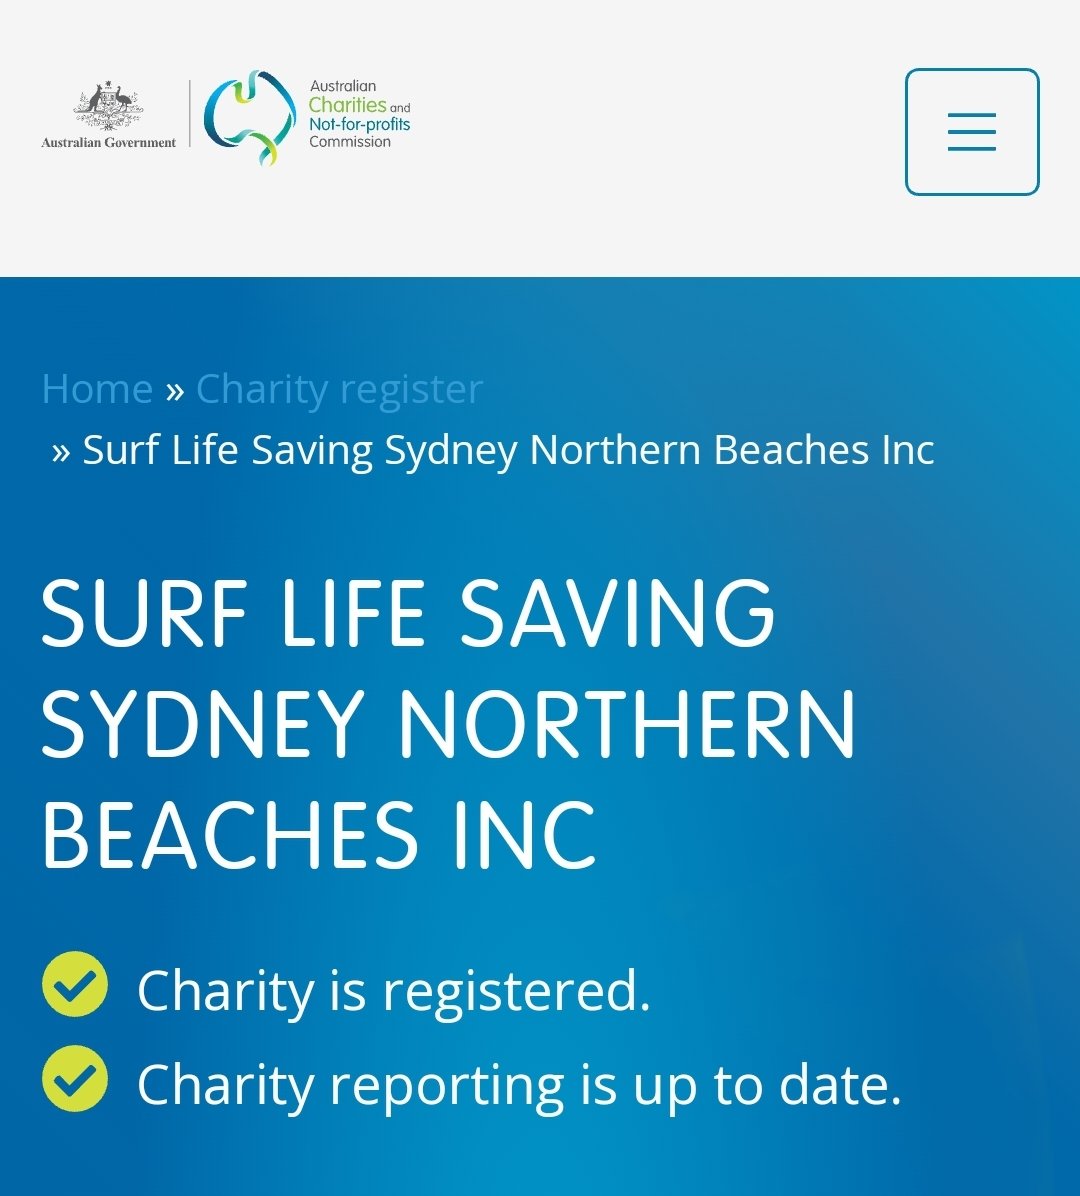 @JasonFalinskiMP I wonder what @ACNC_gov_au has to say about registered charity @slsnsw being used to promote a @LiberalAus candidate.
1. acnc.gov.au/charity/charit…
2. acnc.gov.au/charity/charit…